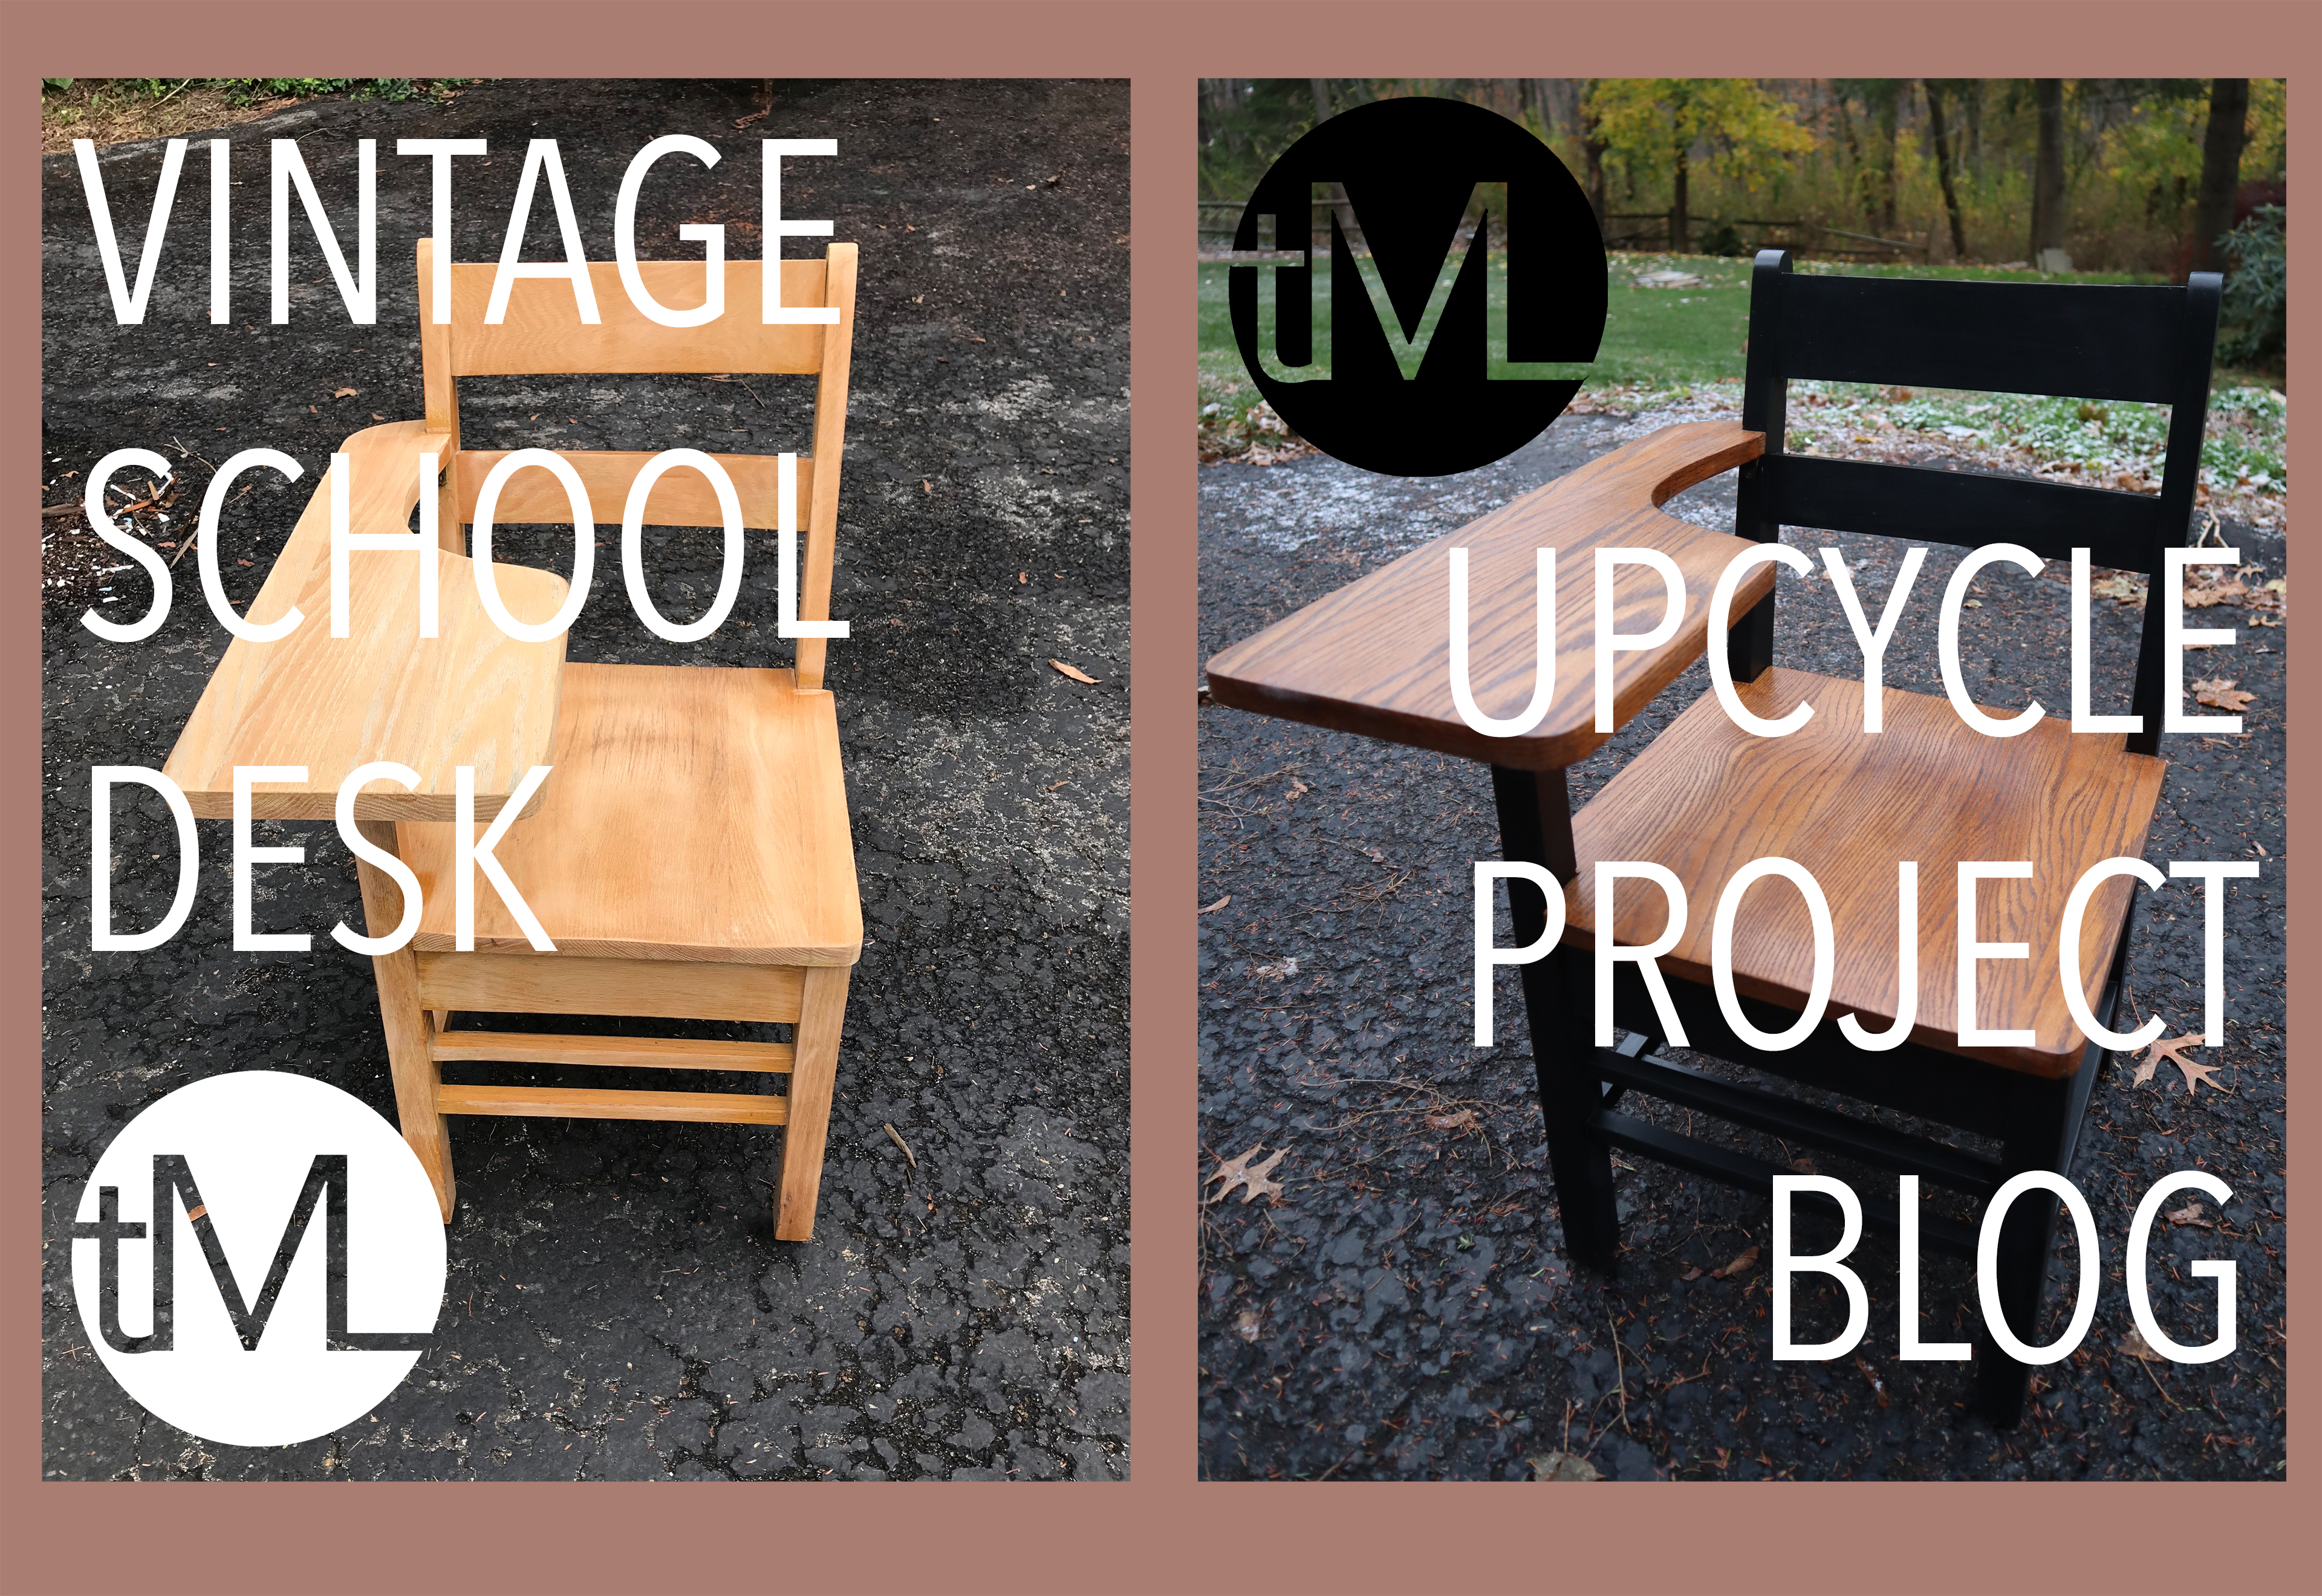 12 Upcycled Kids Table Makeovers: Round-up! - Making Things is Awesome